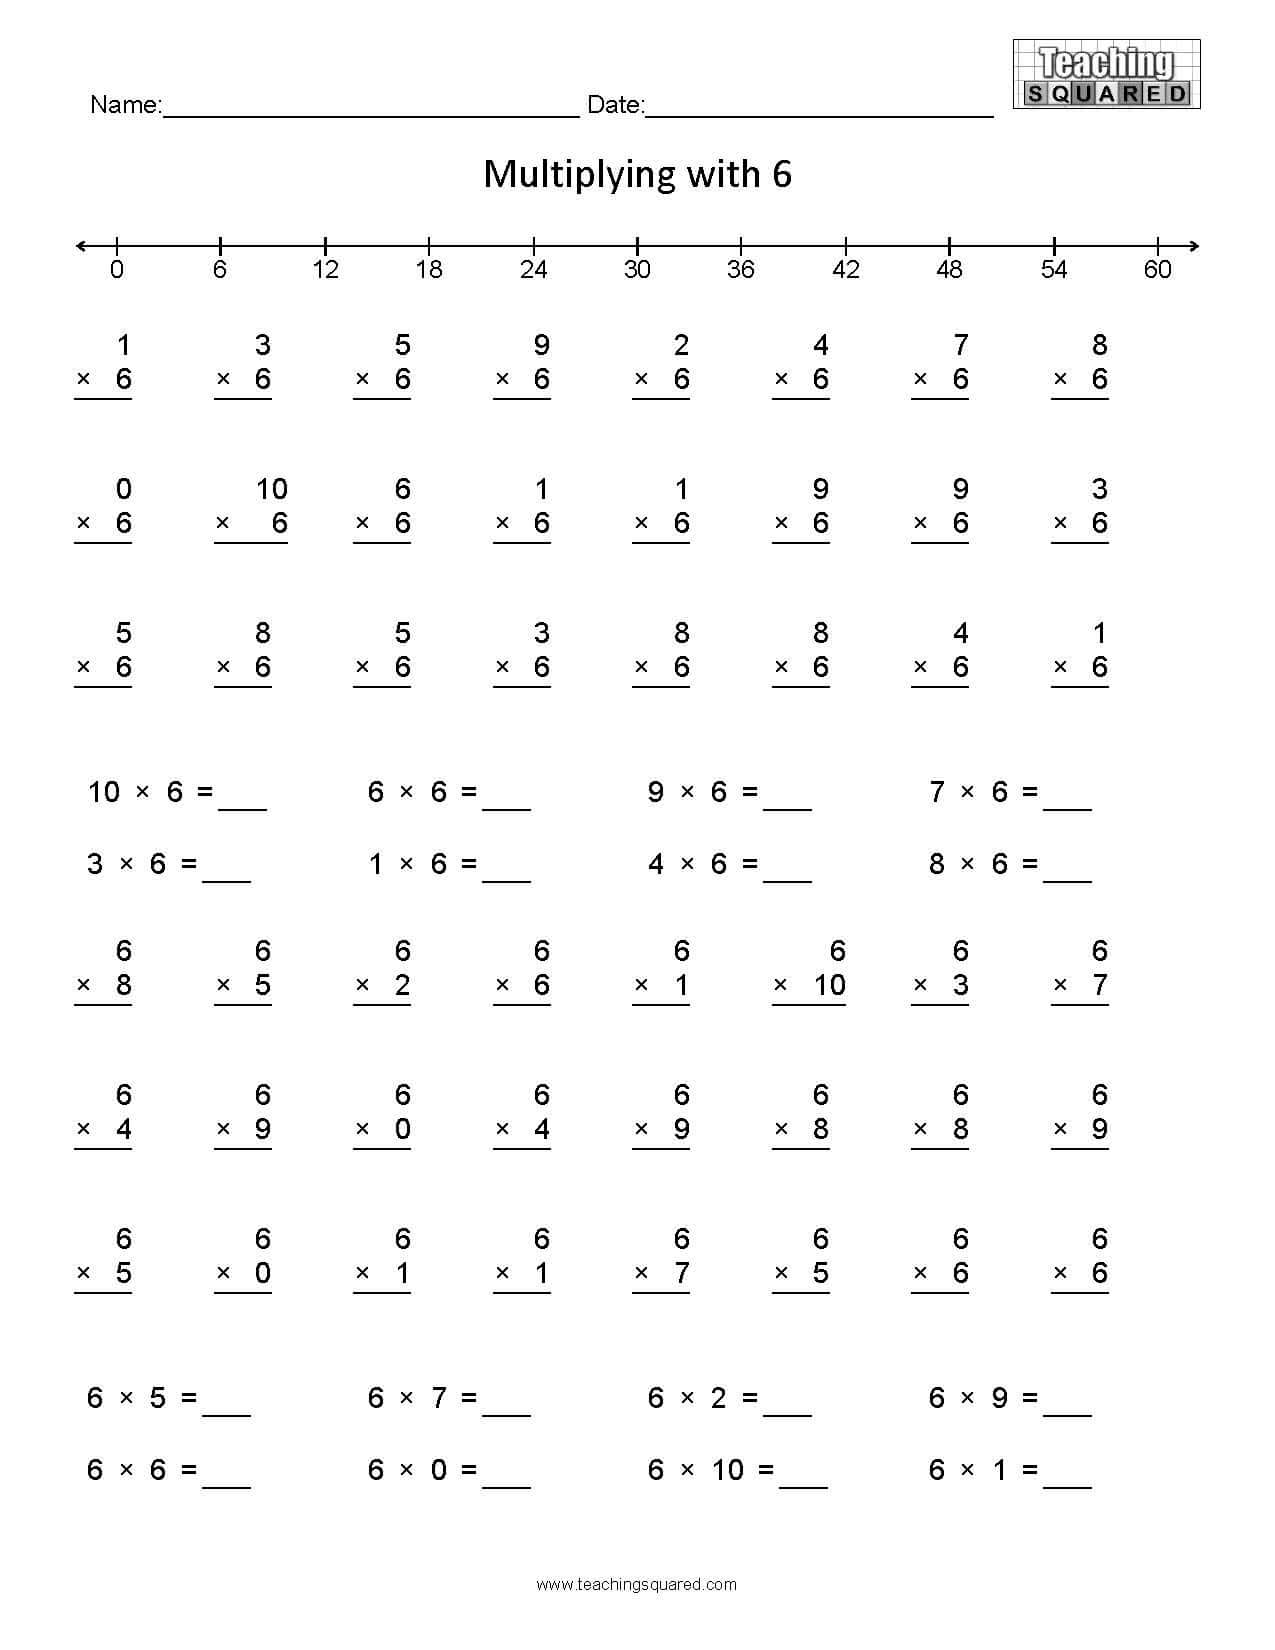 Learning Multiplication- Multiplying by 22 - Teaching Squared Pertaining To Multiplying By 6 Worksheet